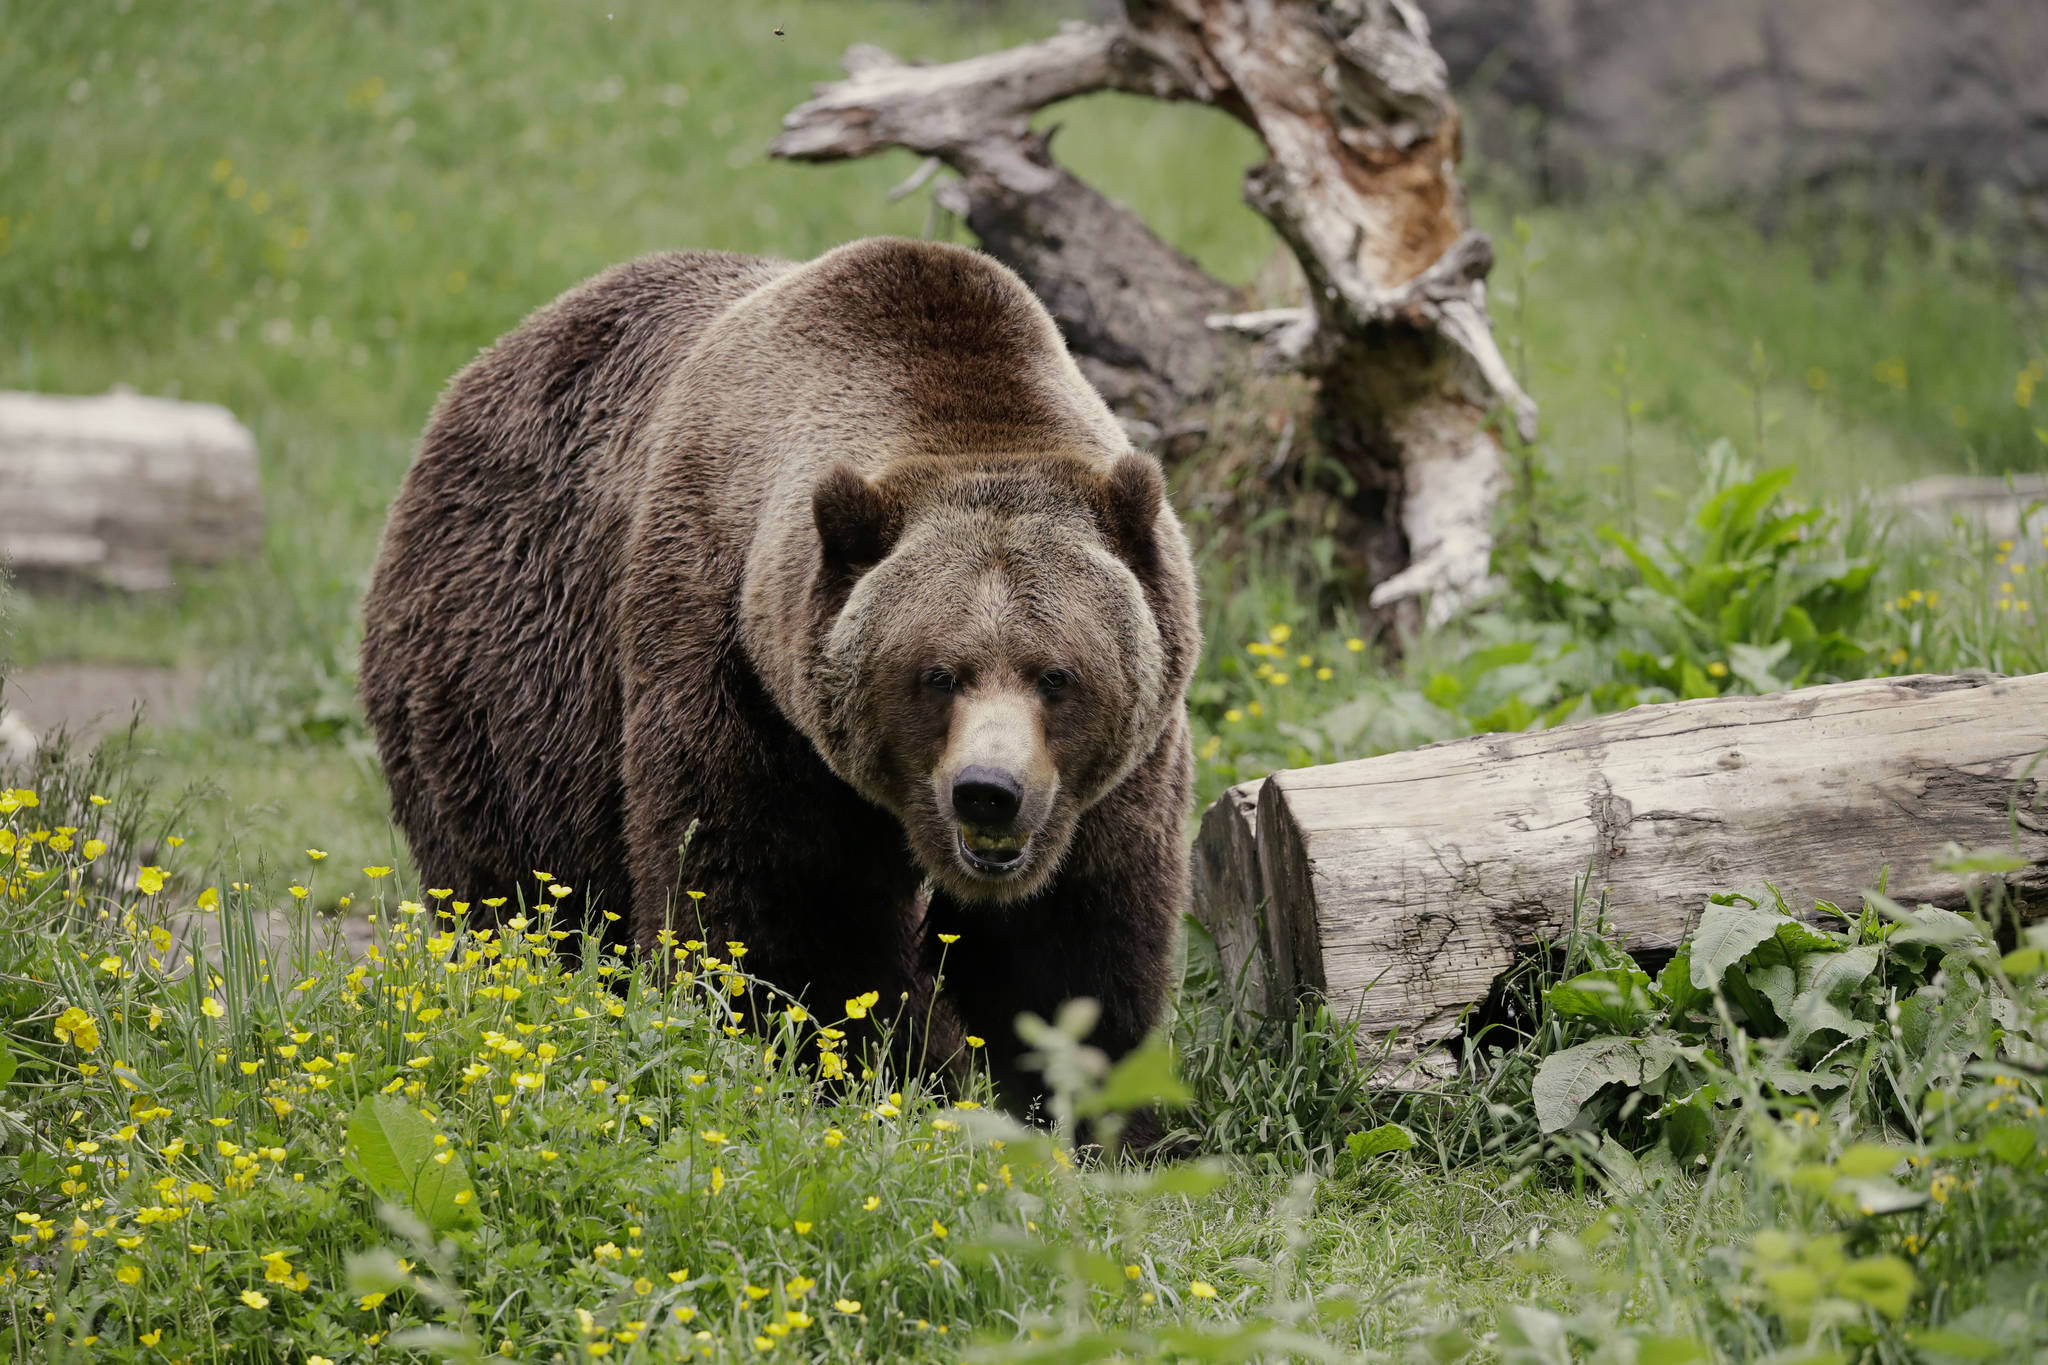 A grizzly bear roams an exhibit at the Woodland Park Zoo, closed for nearly three months because of the coronavirus outbreak in Seattle. Grizzly bears once roamed the rugged landscape of the North Cascades in Washington state but few have been sighted in recent decades. The federal government is scrapping plans to reintroduce grizzly bears to the North Cascades ecosystem. (AP Photo/Elaine Thompson, File)